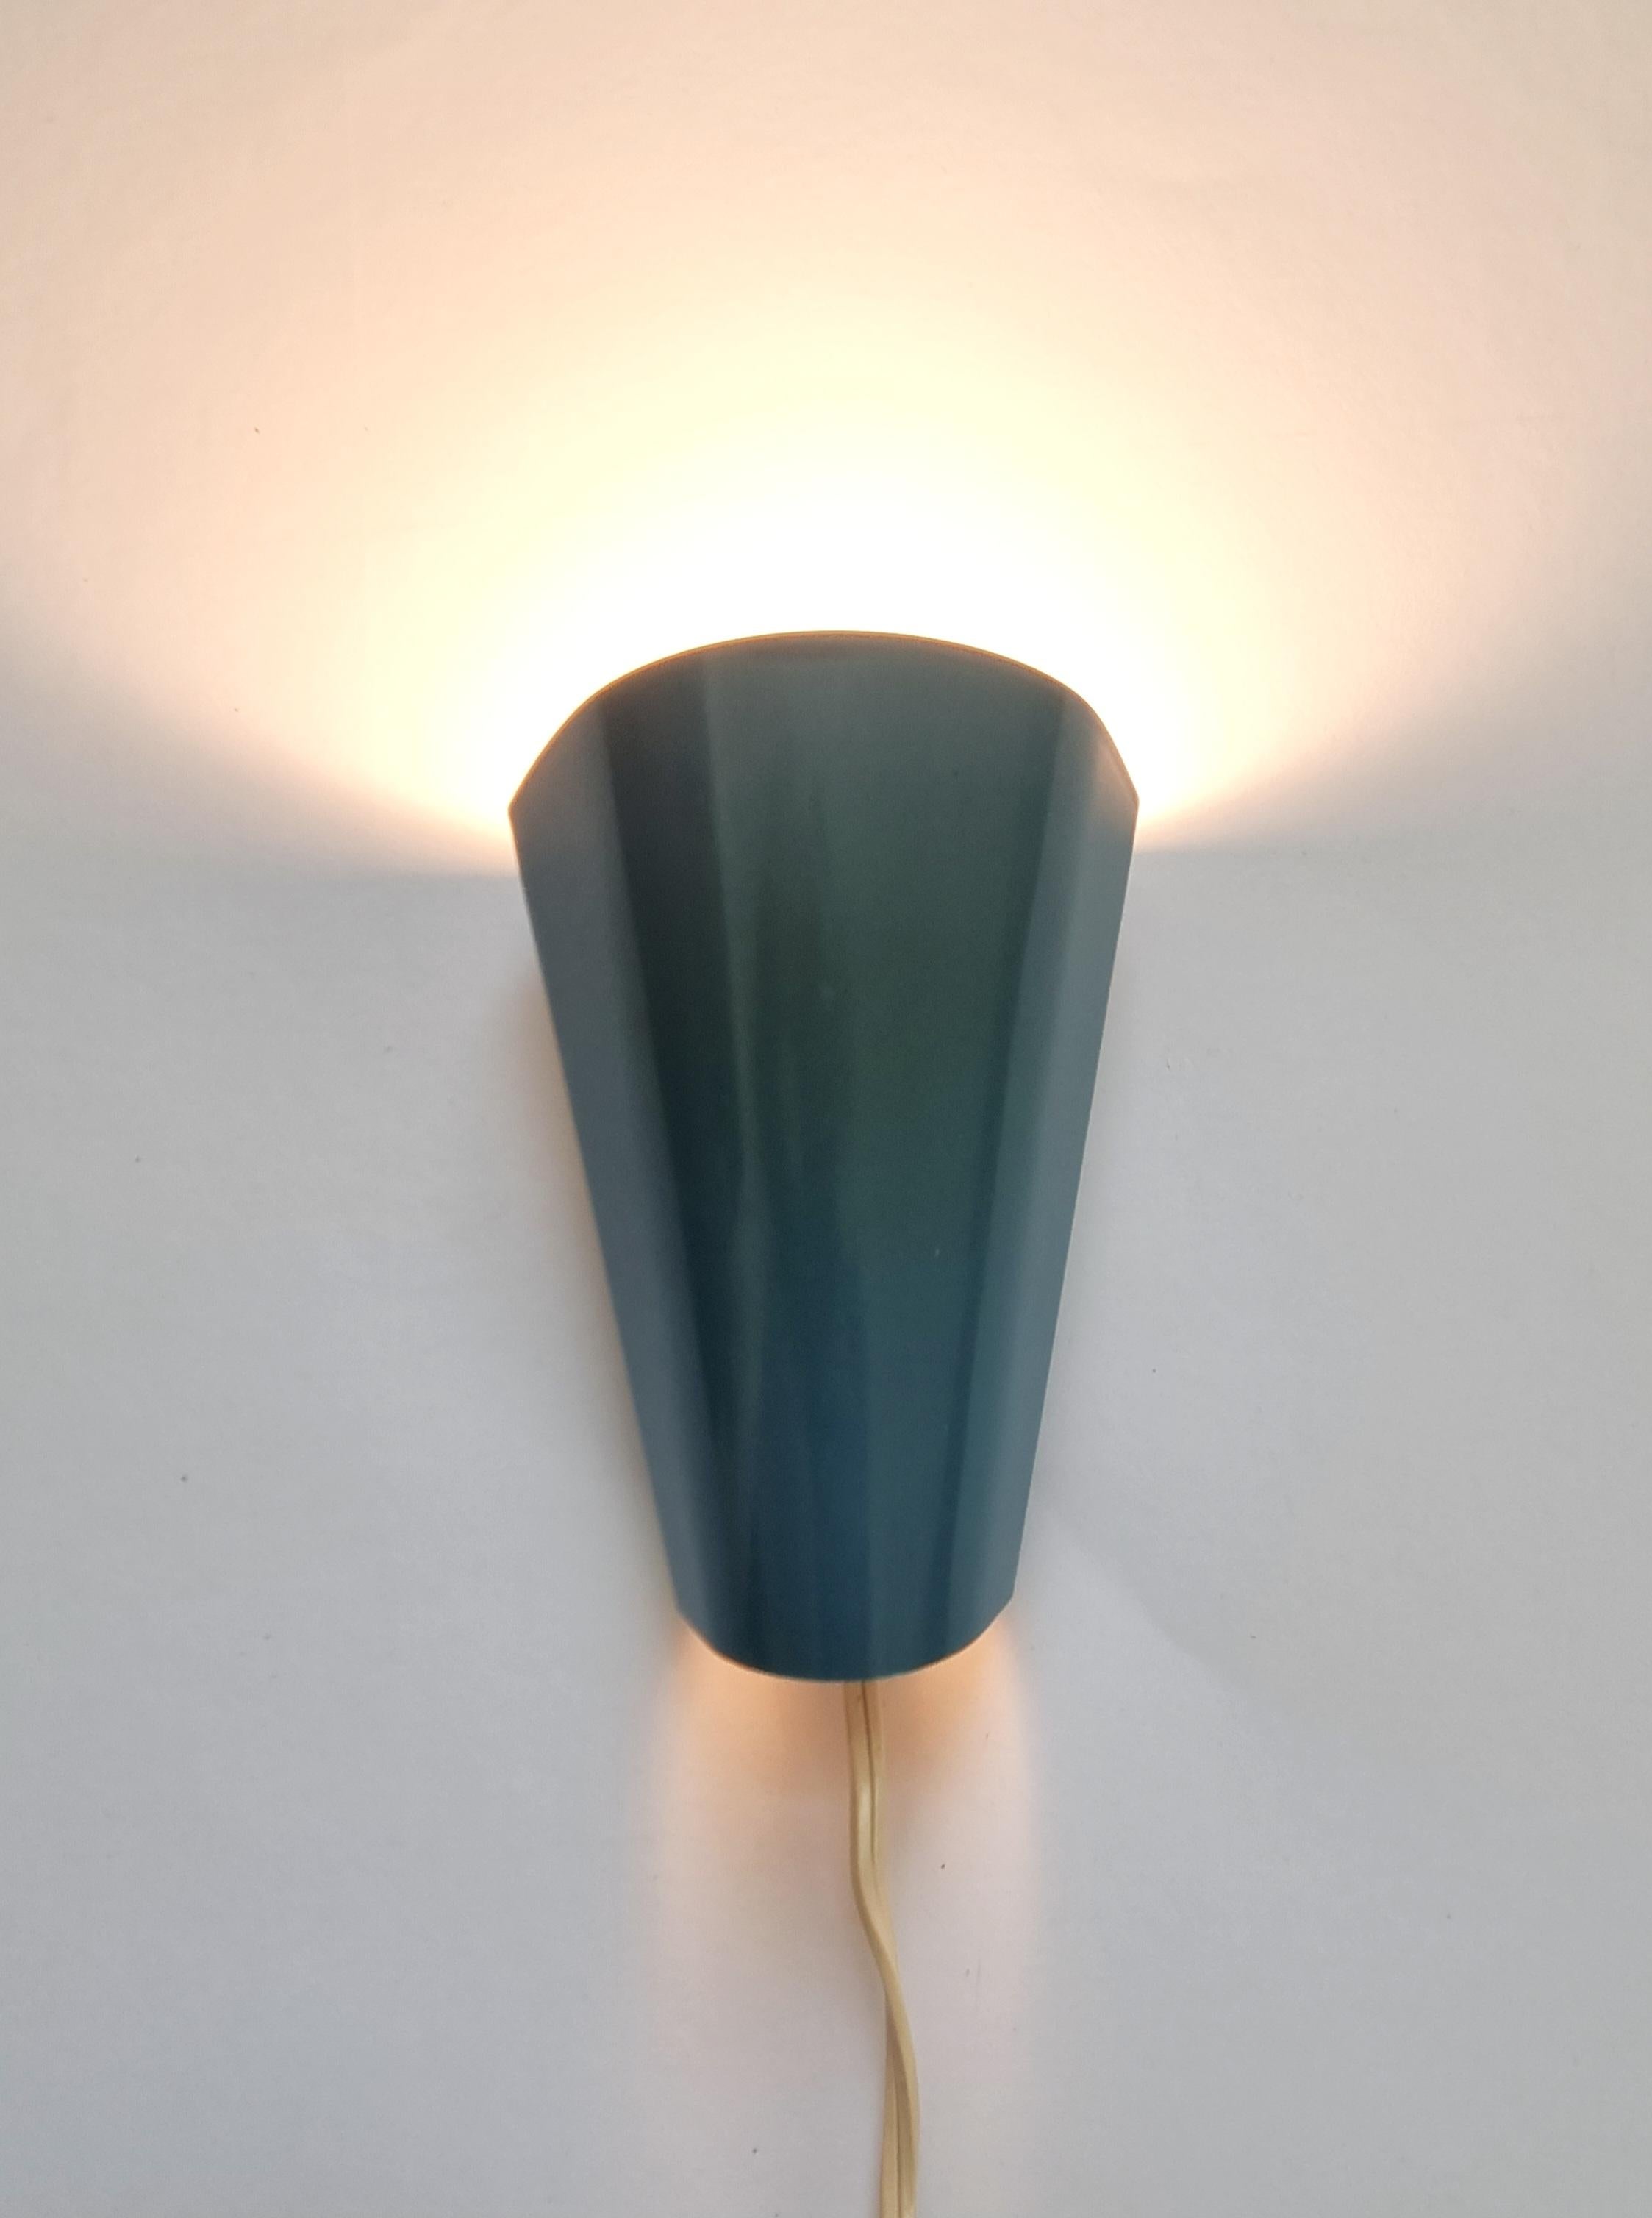 Lacquered Set of 2 Midcentury Wall Lamps, Lidokov, Josef Hurka, 1960s For Sale